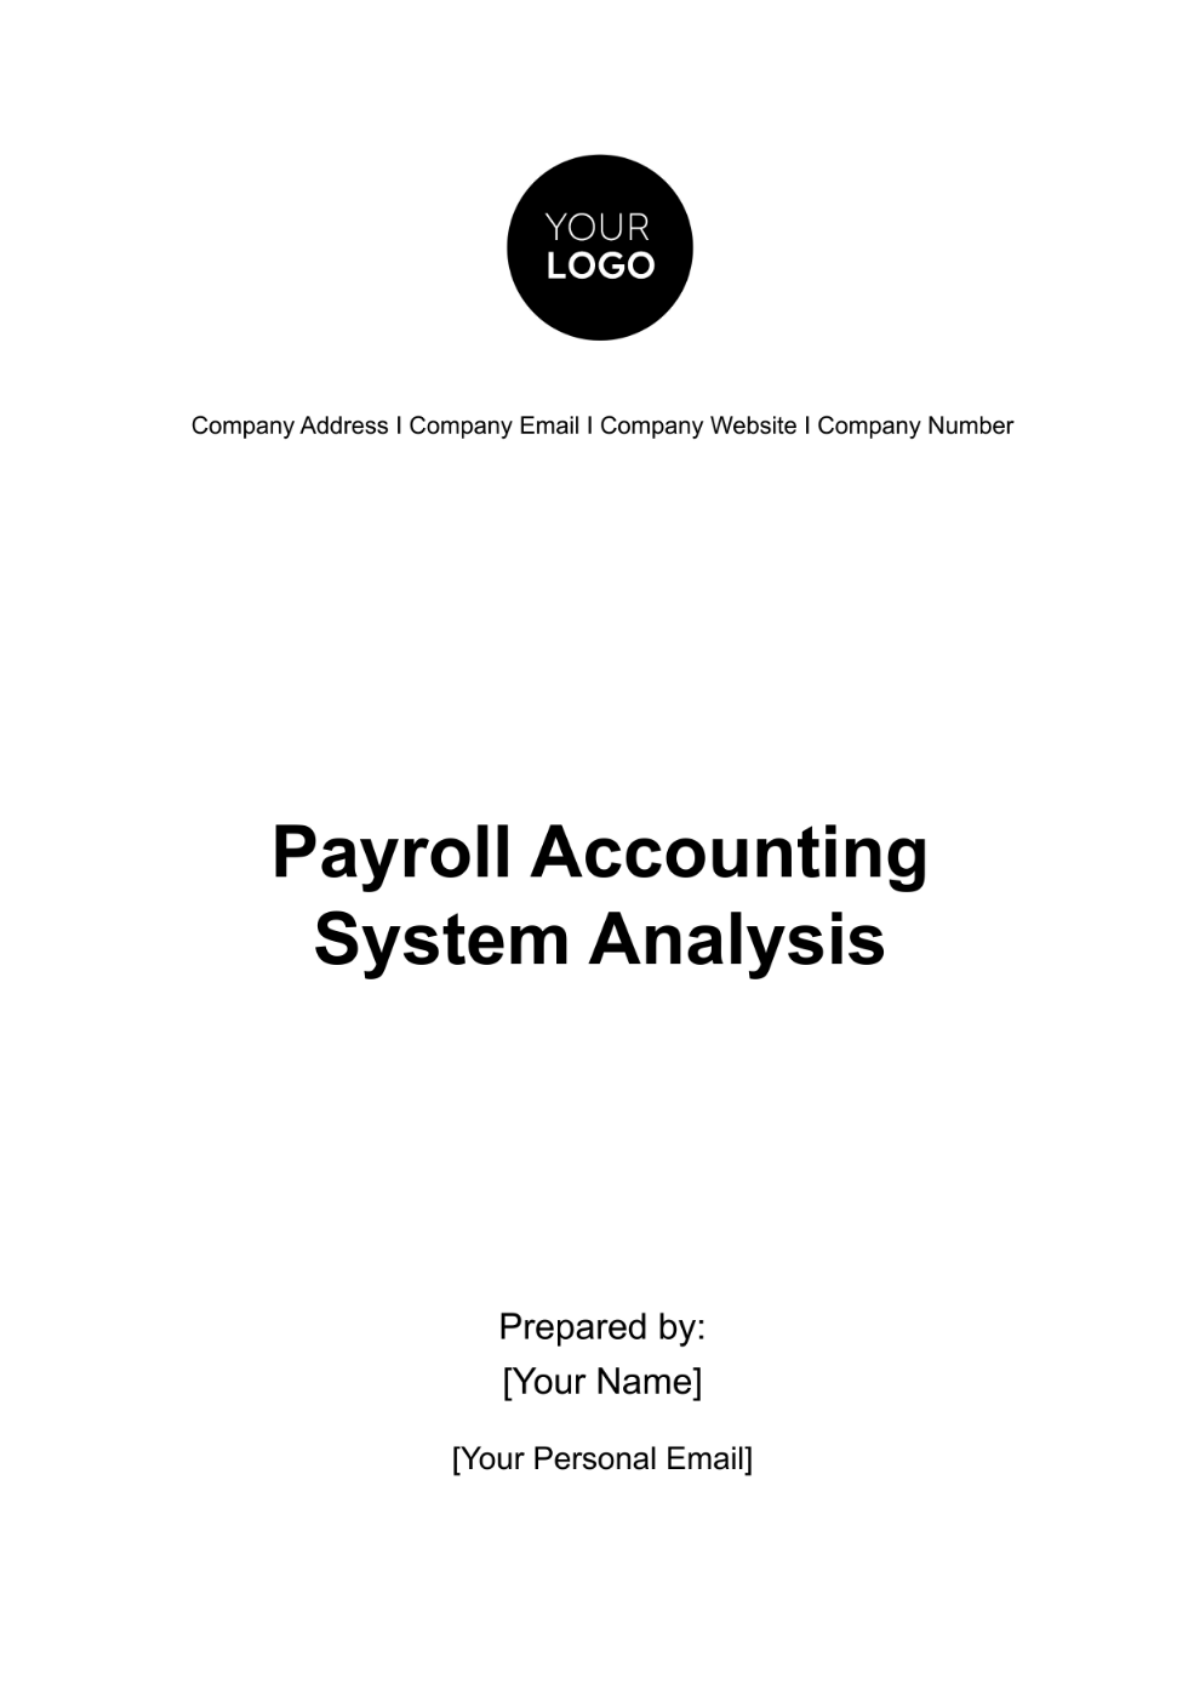 Payroll Accounting System Analysis Template